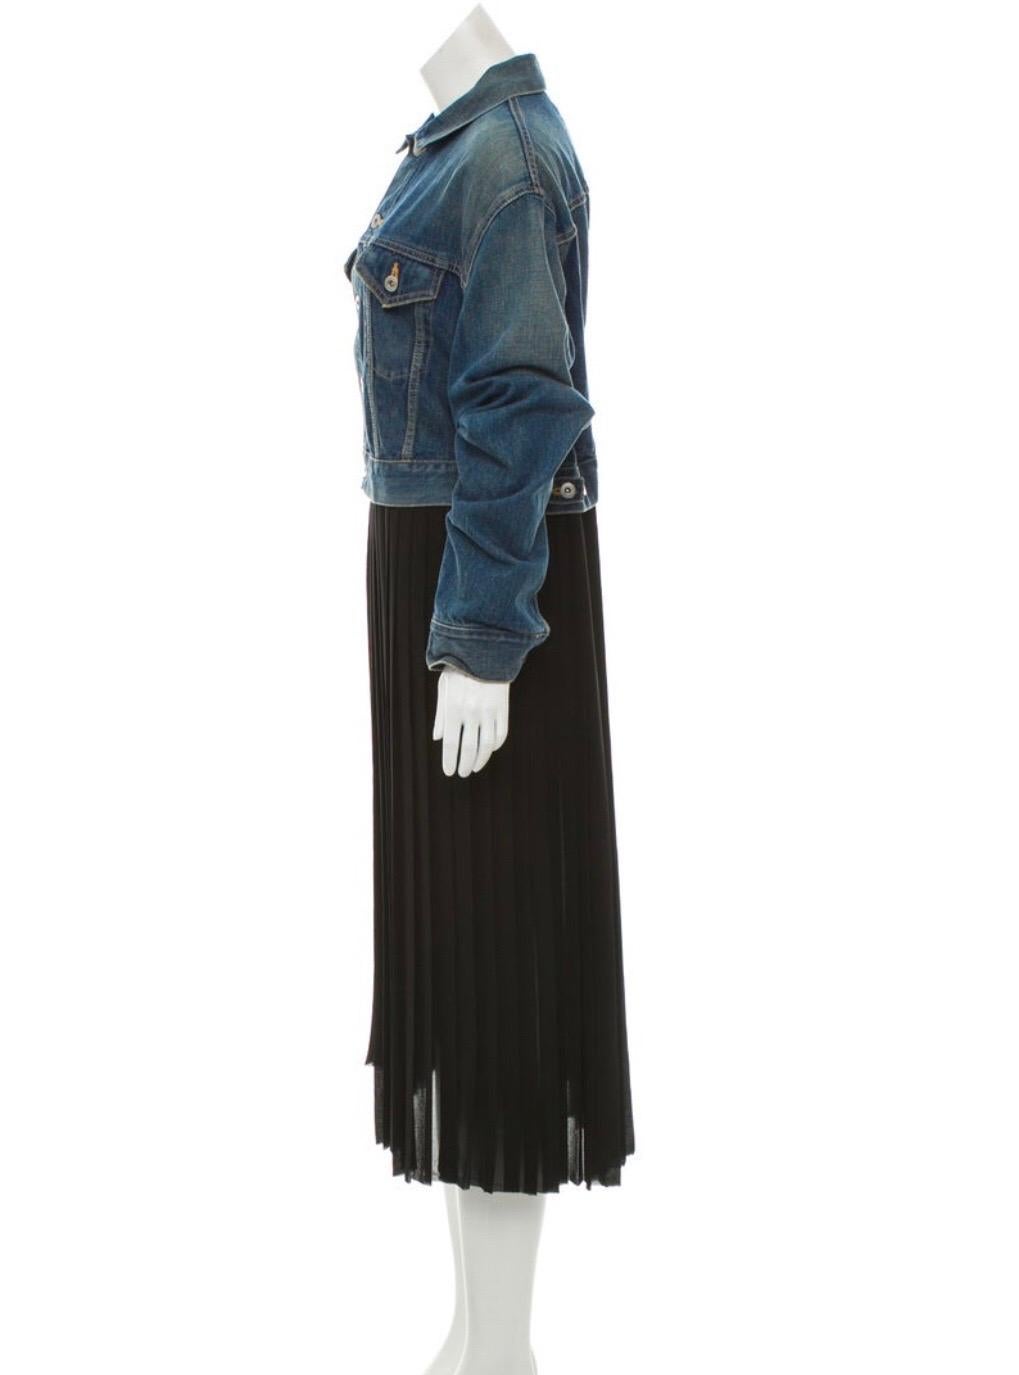 Medium wash blue and black Junya Watanabe Comme des Garçons dress with denim bodice. Attached pleated crepe skirt and button closures at front. Condition: Excellent.  Size  S ( mannequin is US size 6 ) 

Bust: 46